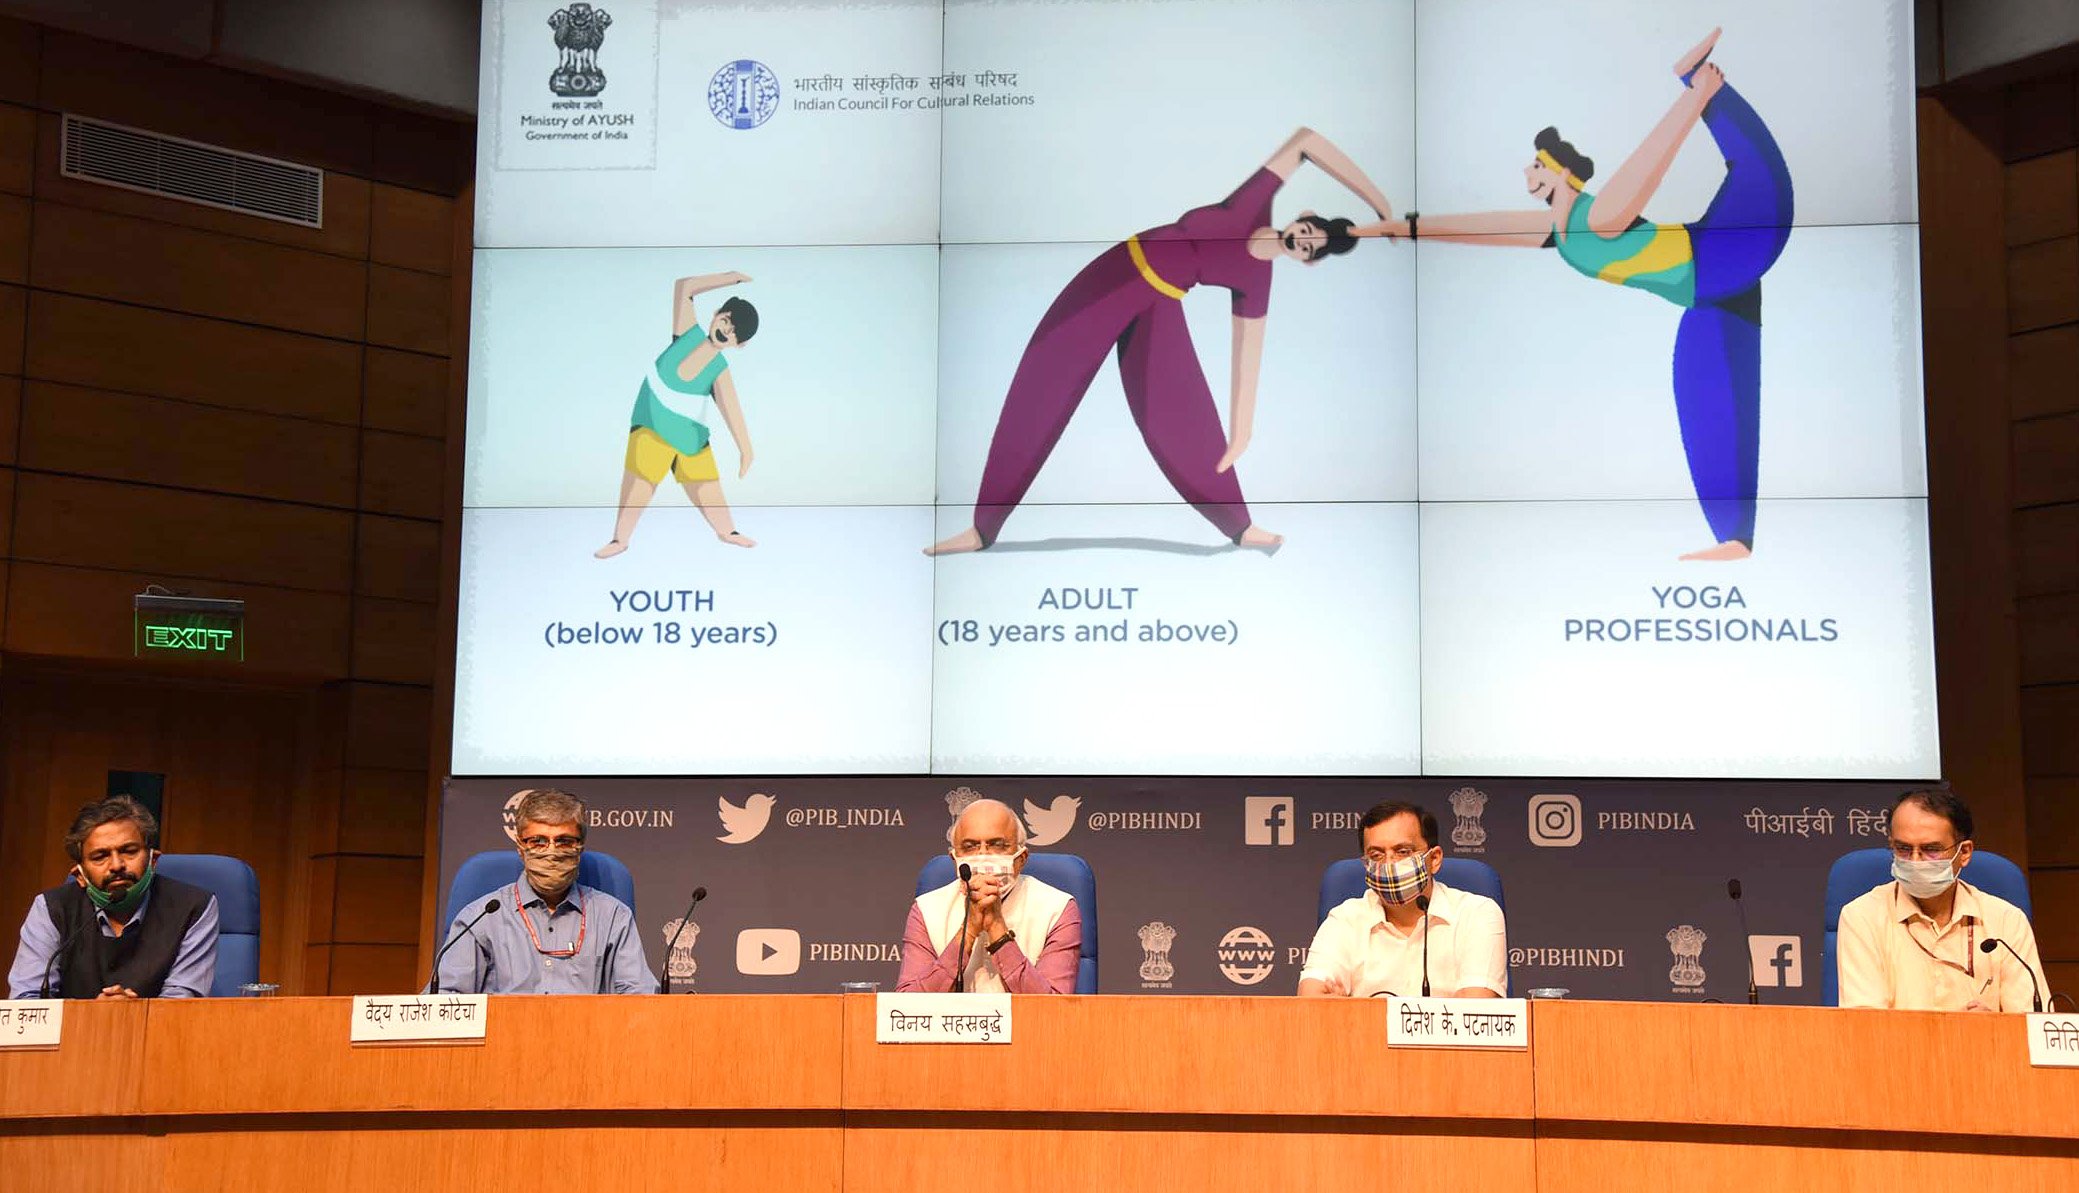 AYUSH Ministry gears up for International Day of Yoga 2020 with the “Yoga at Home, Yoga with Family” campaign